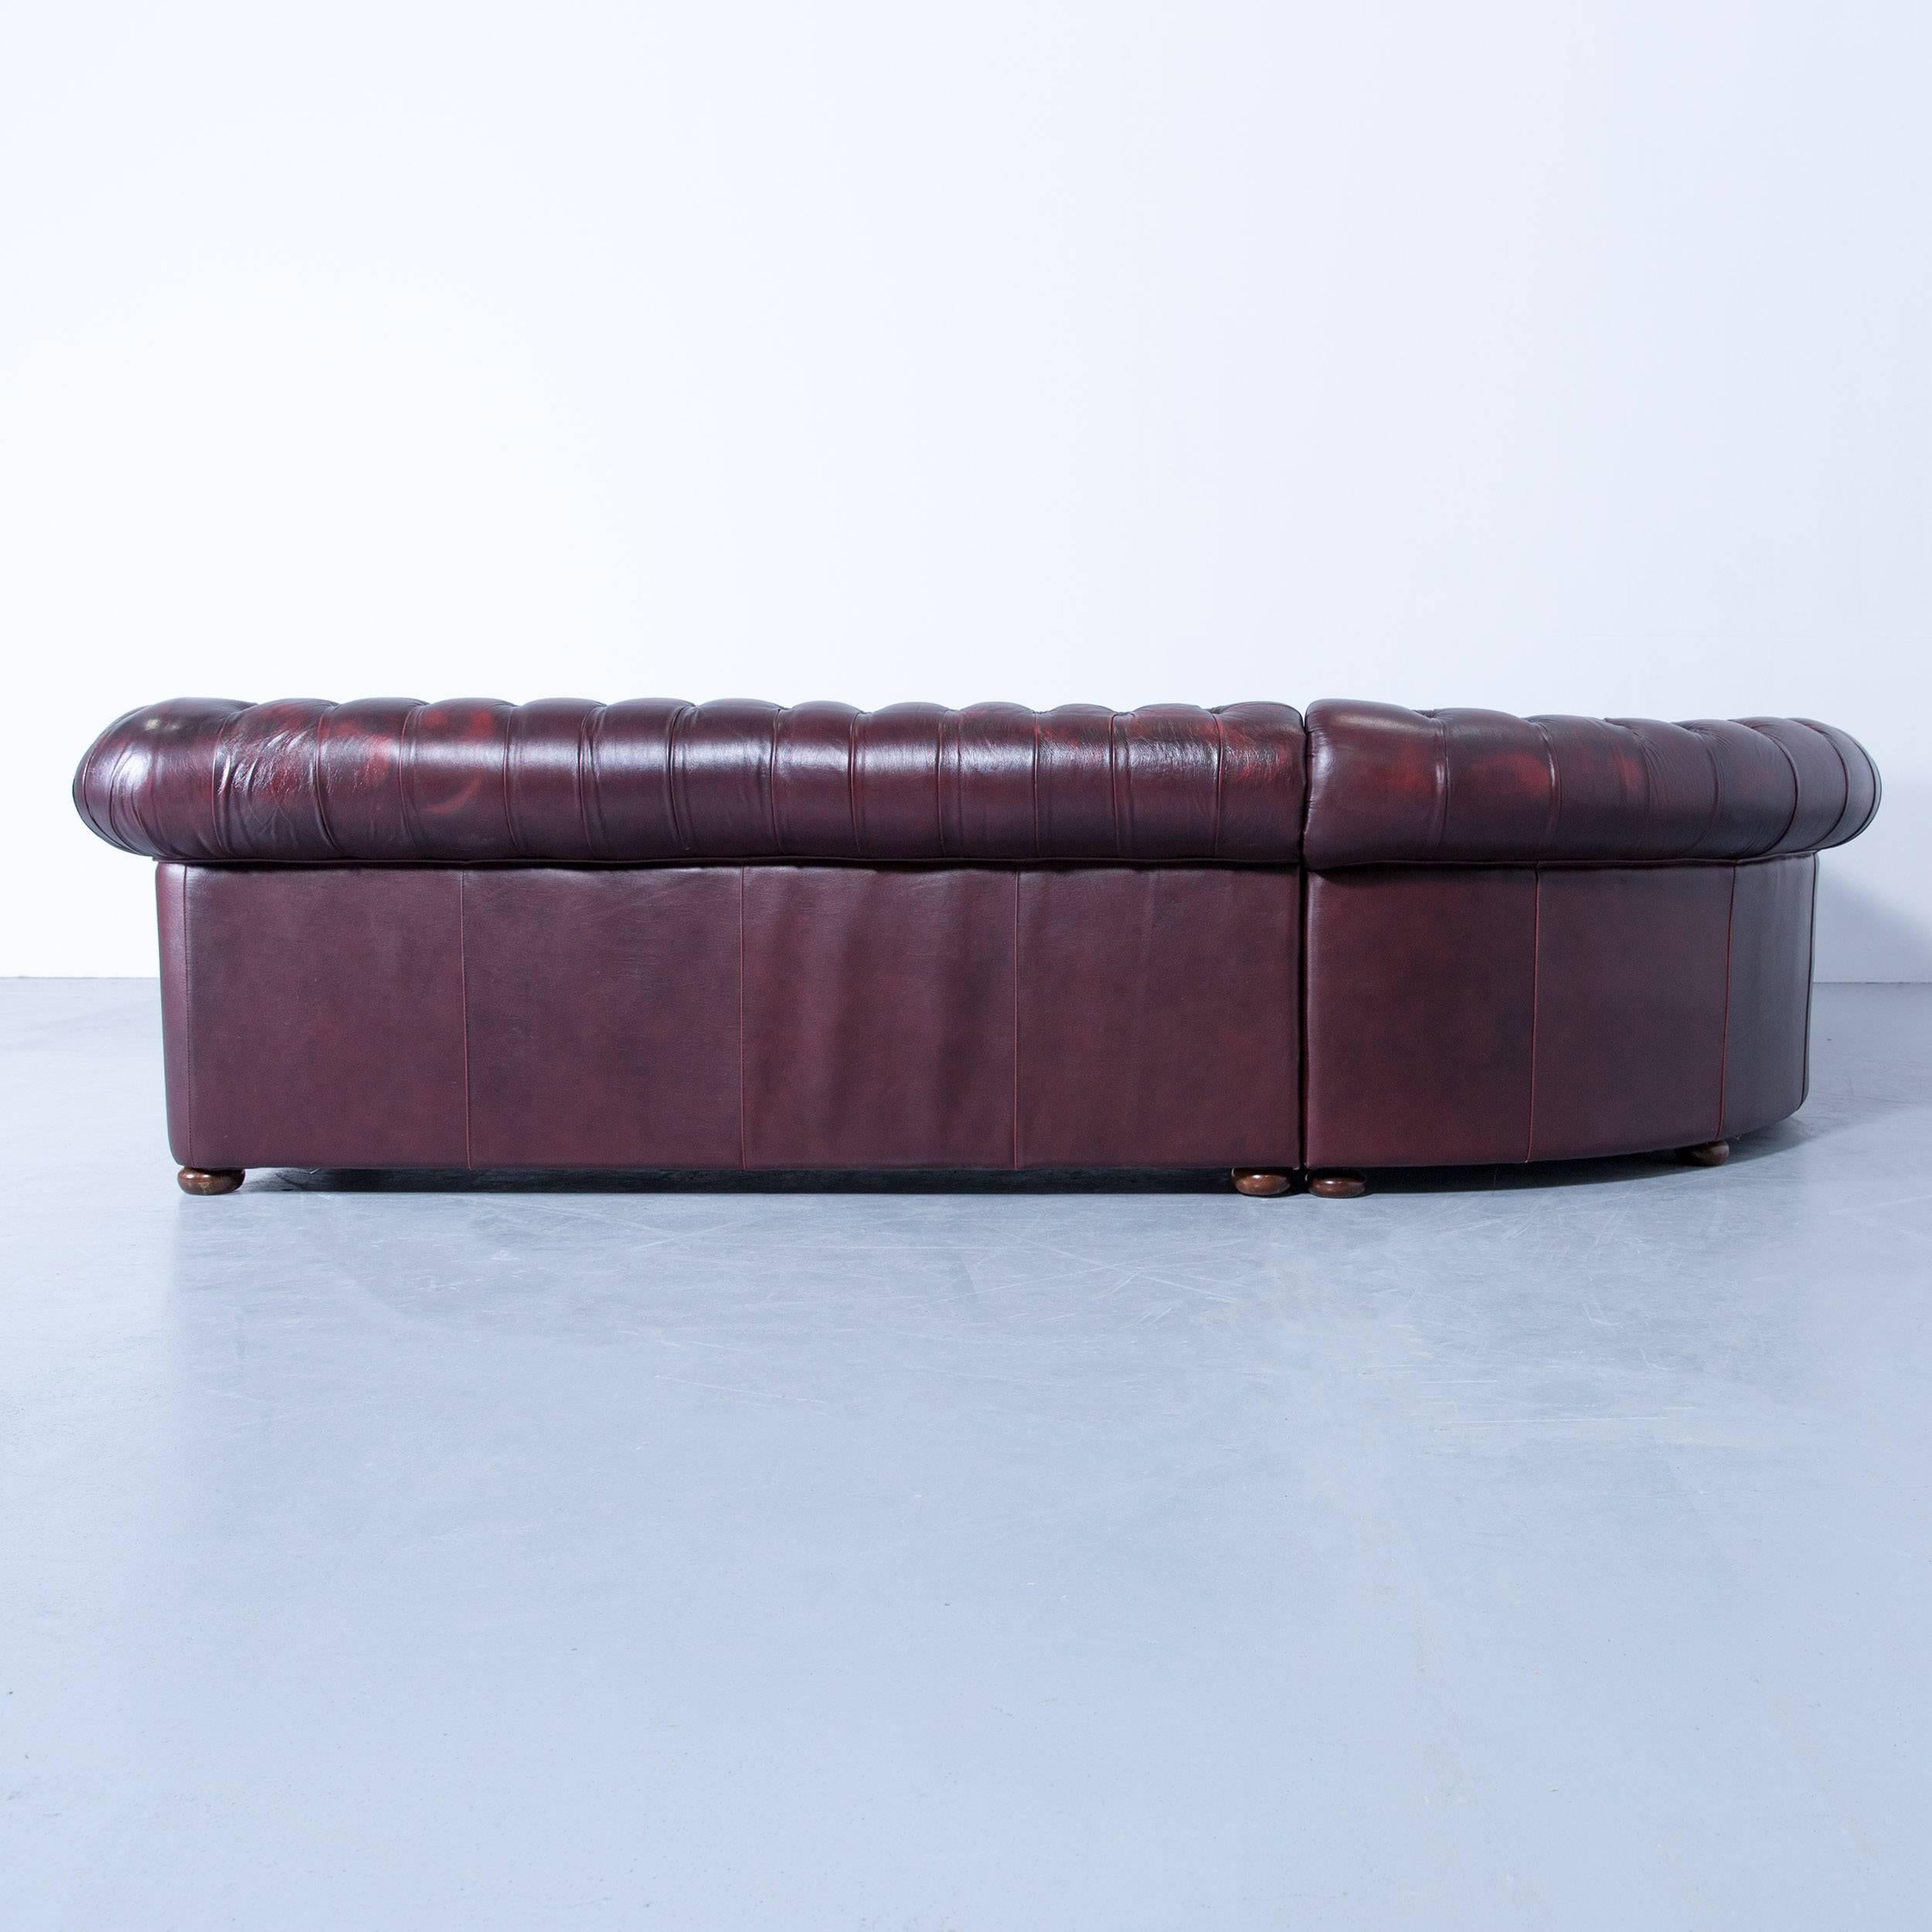 British Rochester Chesterfield Corner Sofa Oxblood Red Leather Couch Vintage Rivets